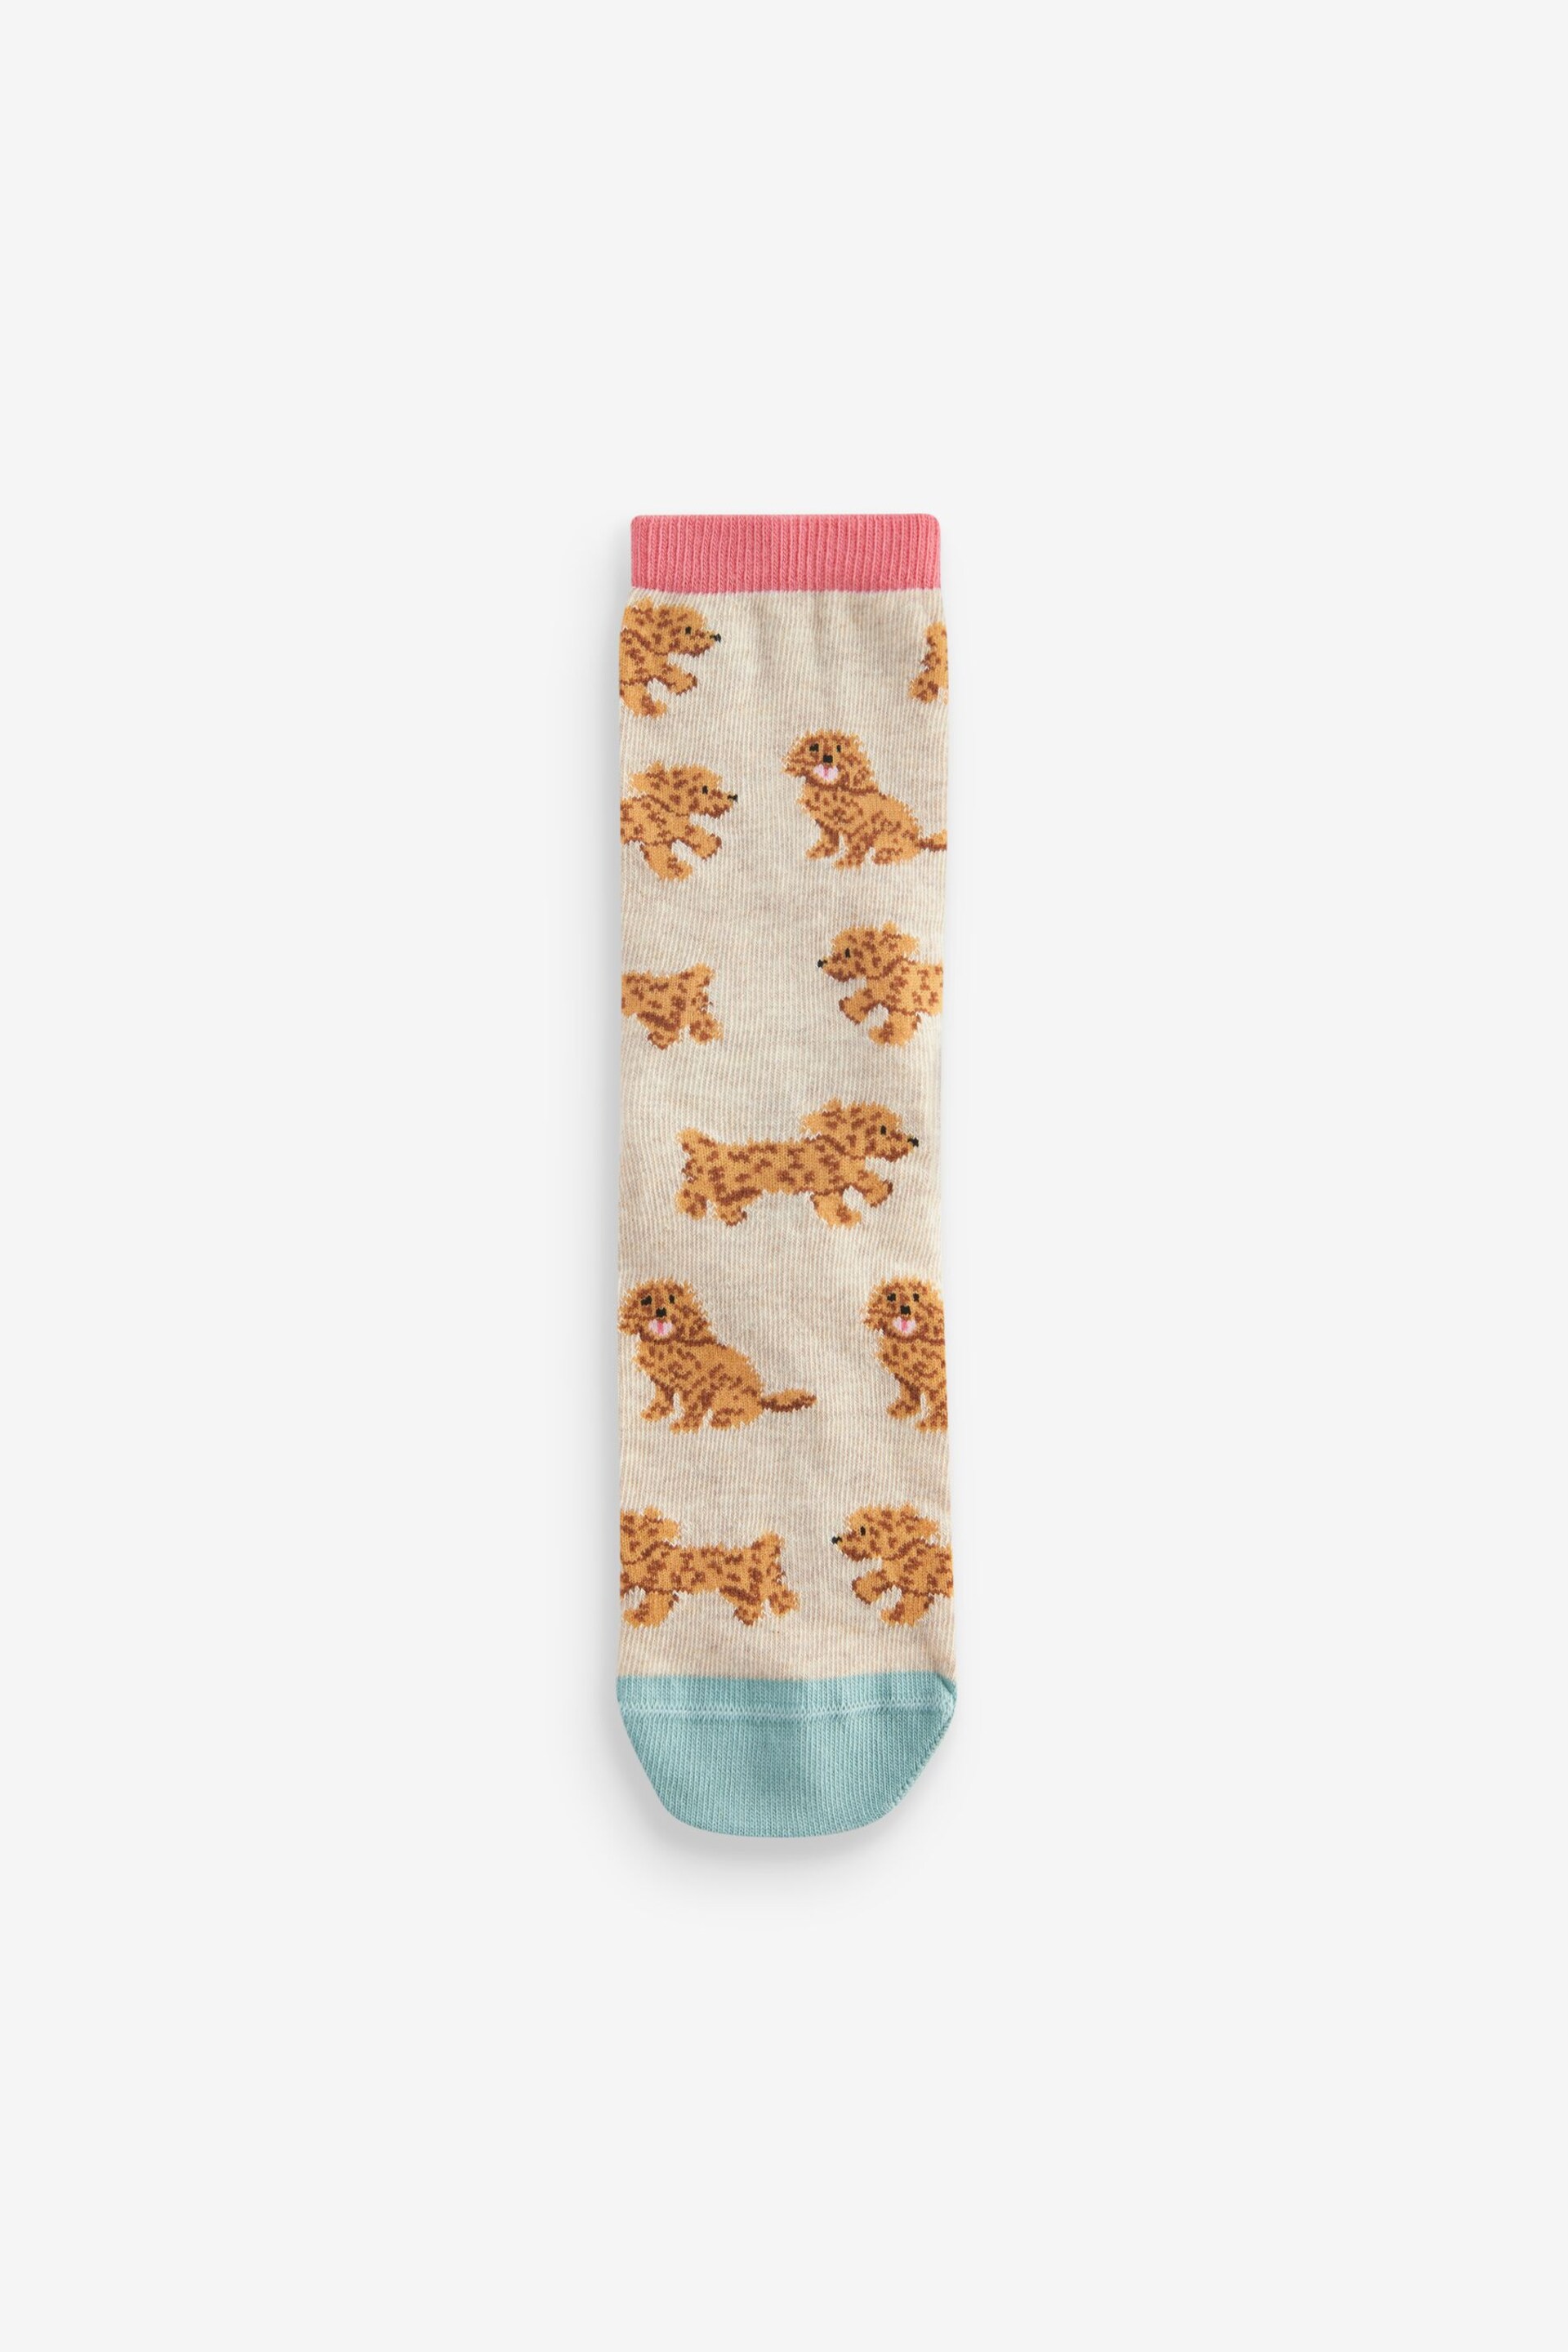 Pink/Blue/Oatmeal Charlie The Cockapoo Ankle Socks 4 Pack - Image 4 of 5